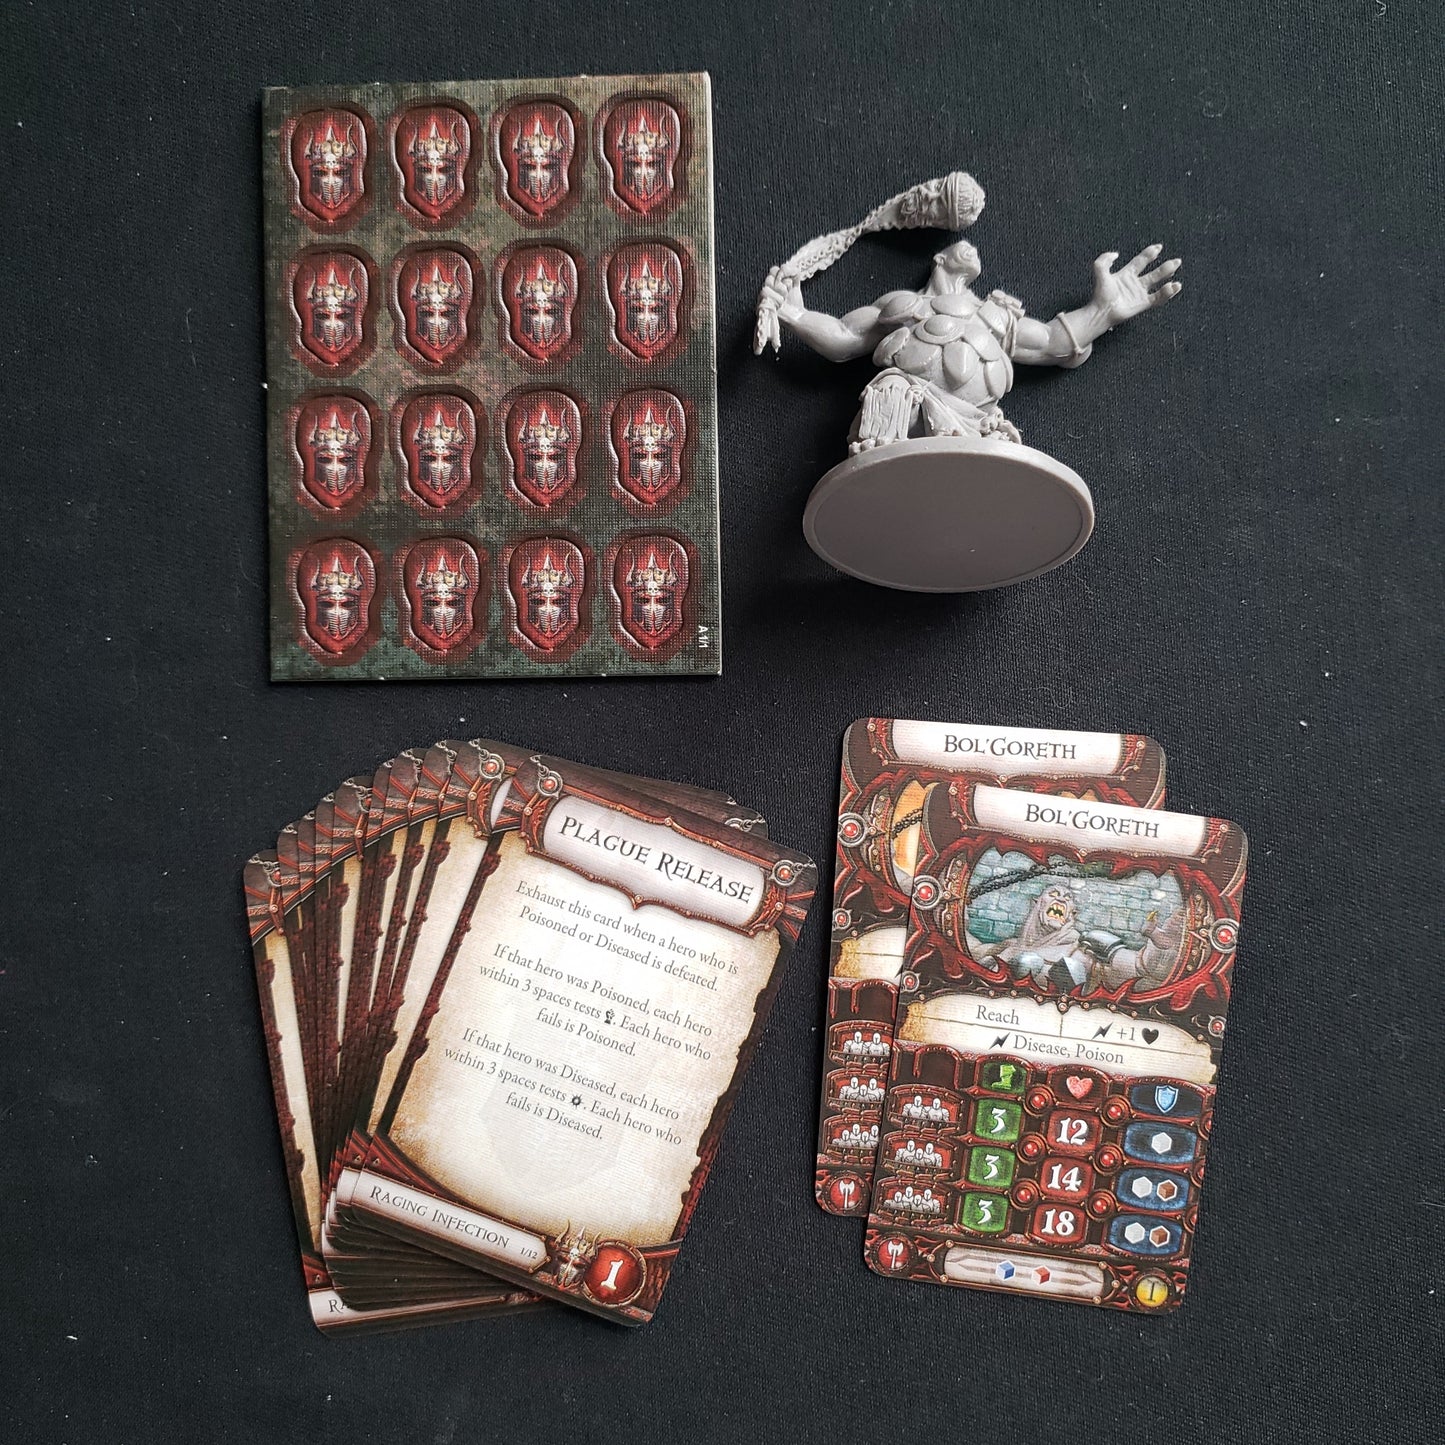 Image shows the components for the Bol'Goreth Lieutenant Pack expansion for the board game Descent: Journeys in the Dark Second Edition